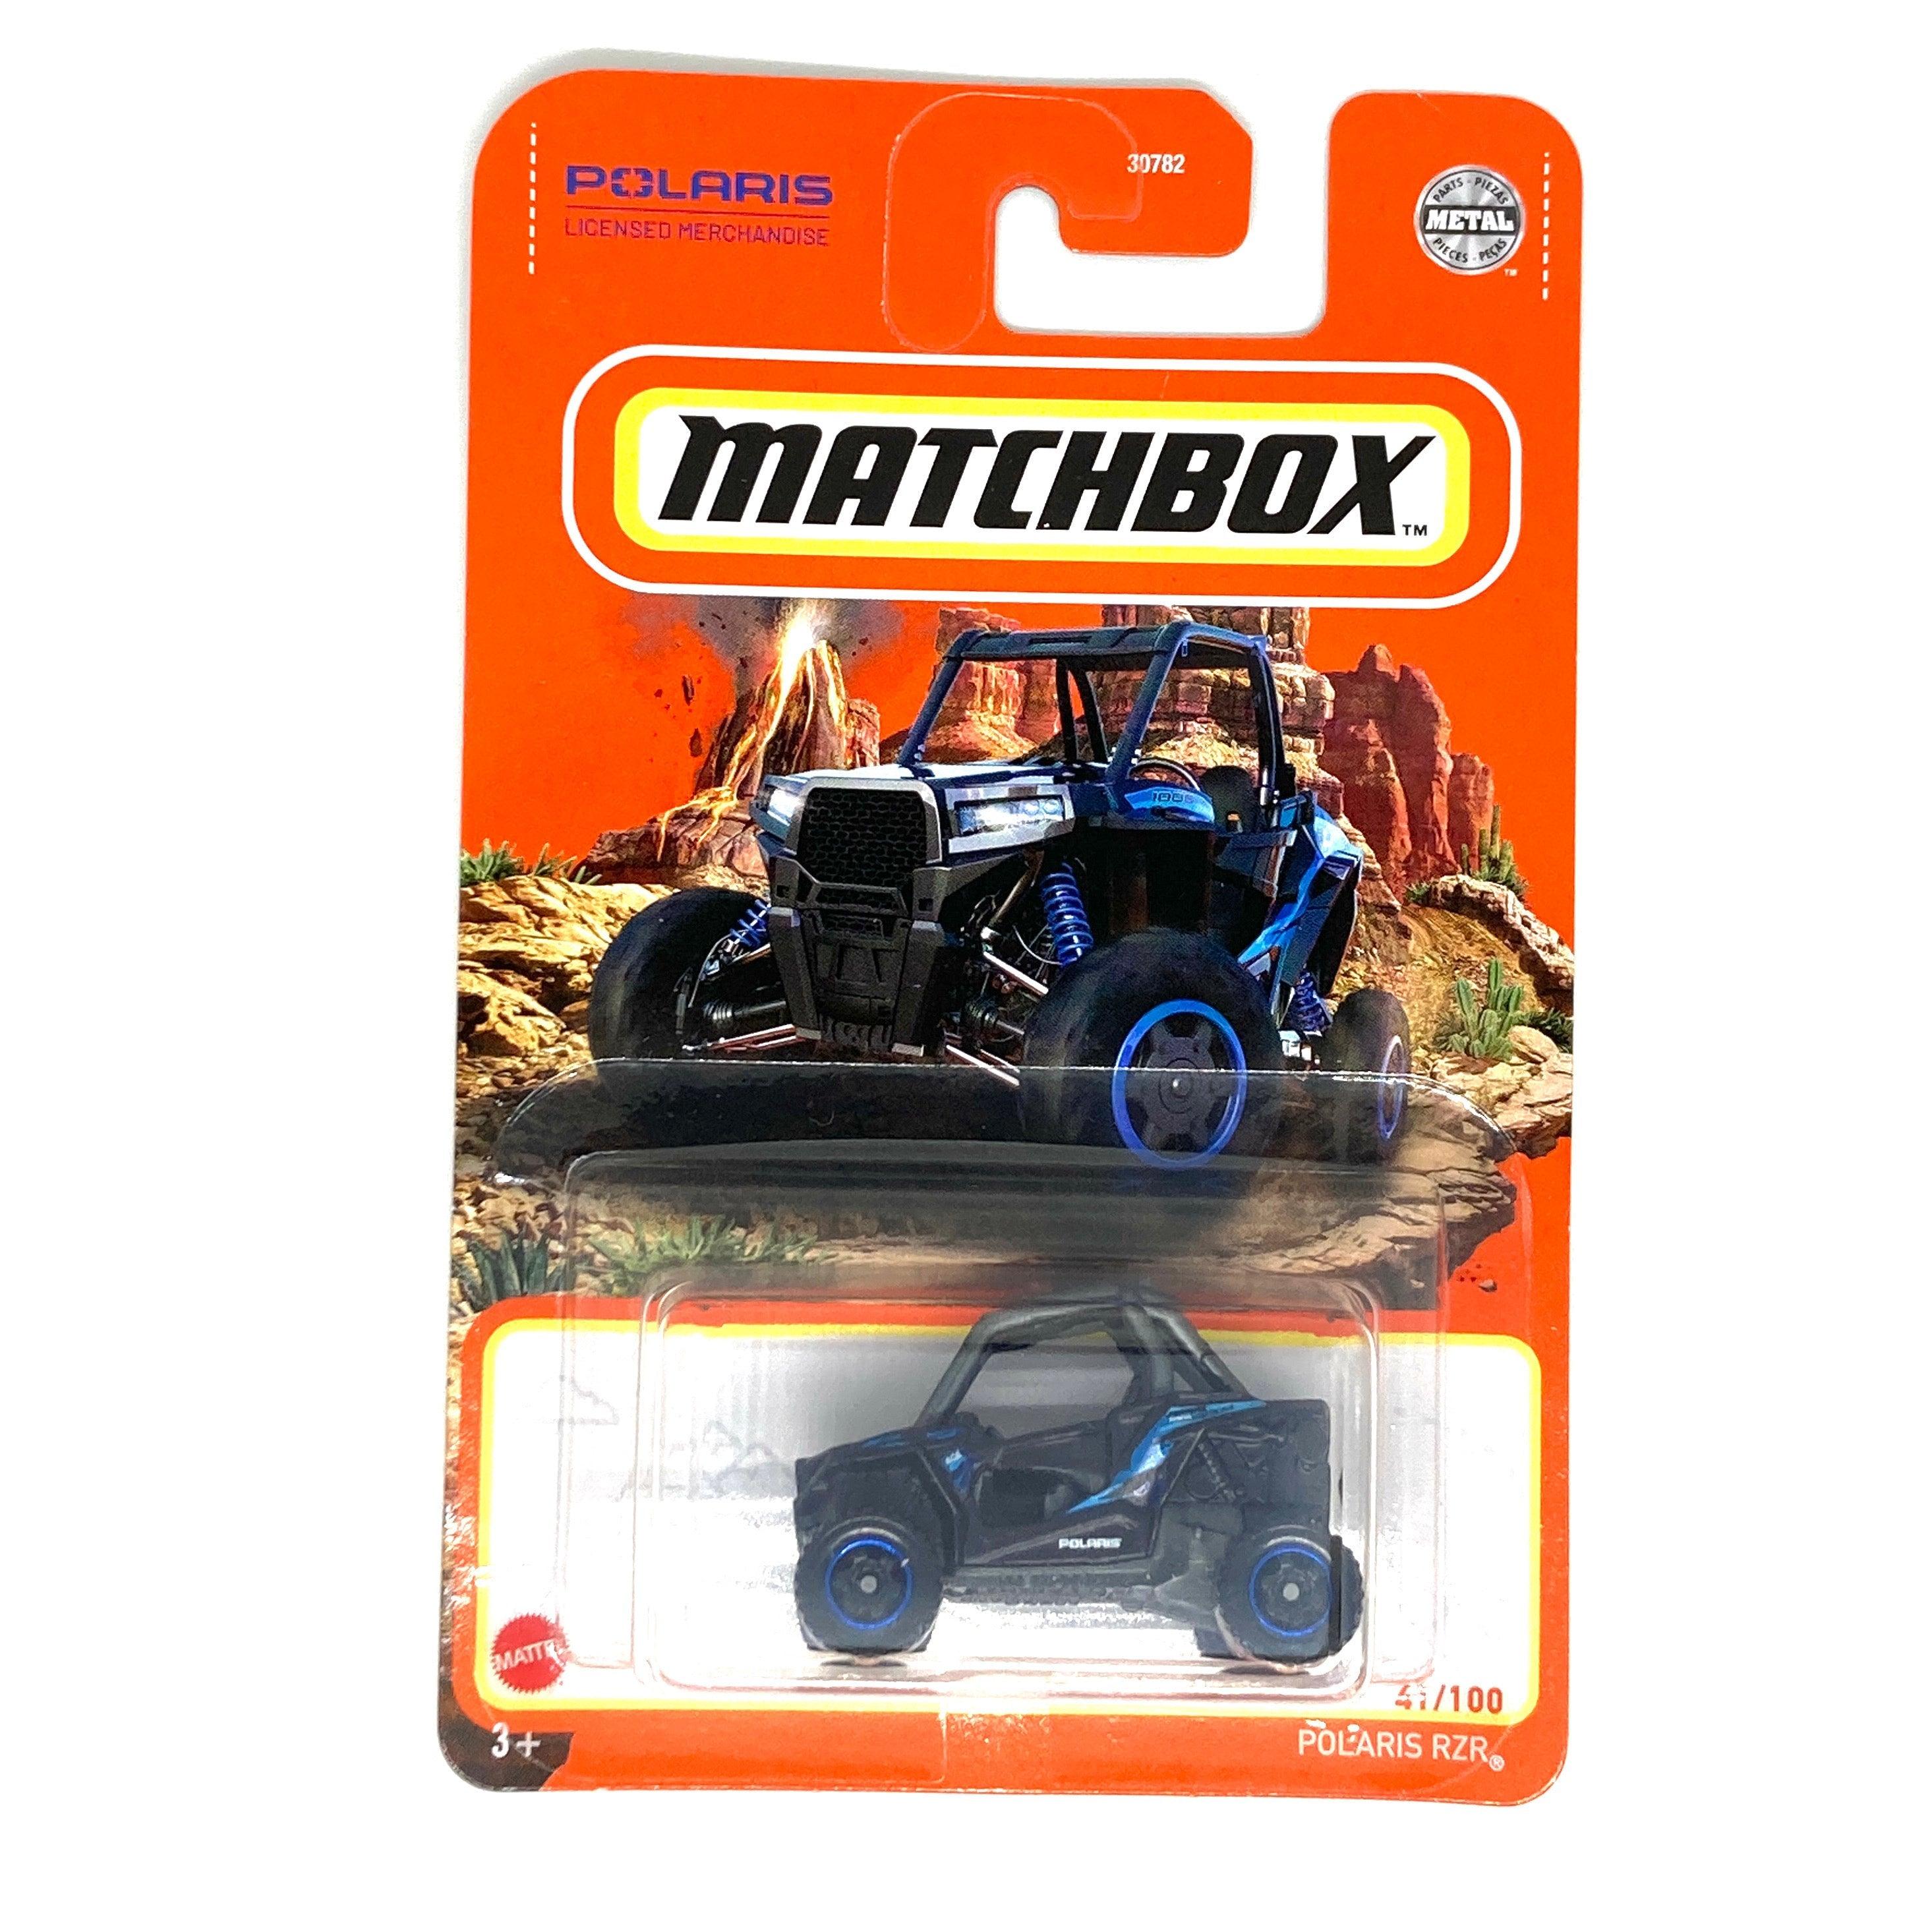 MatchBox Die Cast 1:64 Scale Vehicle - Polaris RZR - BumbleToys - 2-4 Years, 5-7 Years, Boys, Collectible Vehicles, MatchBox